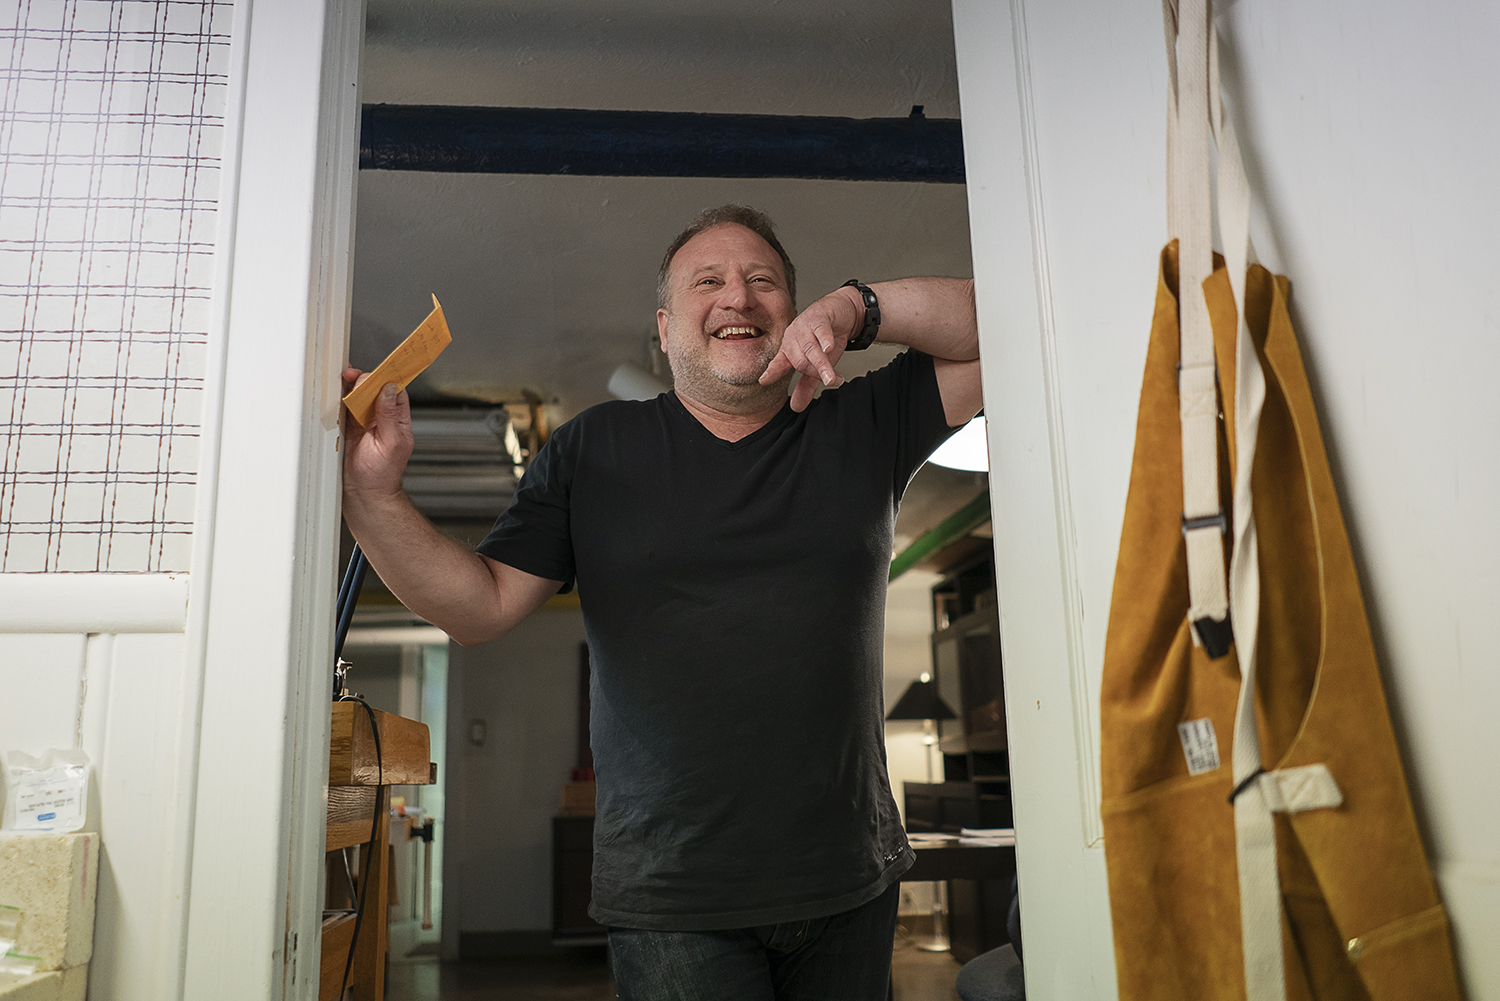 Flint, MI - Tuesday, May 8, 2018: Flint resident and metalsmith Robert McAdow laughs as he leans on the doorway to his soldering area in his studio.